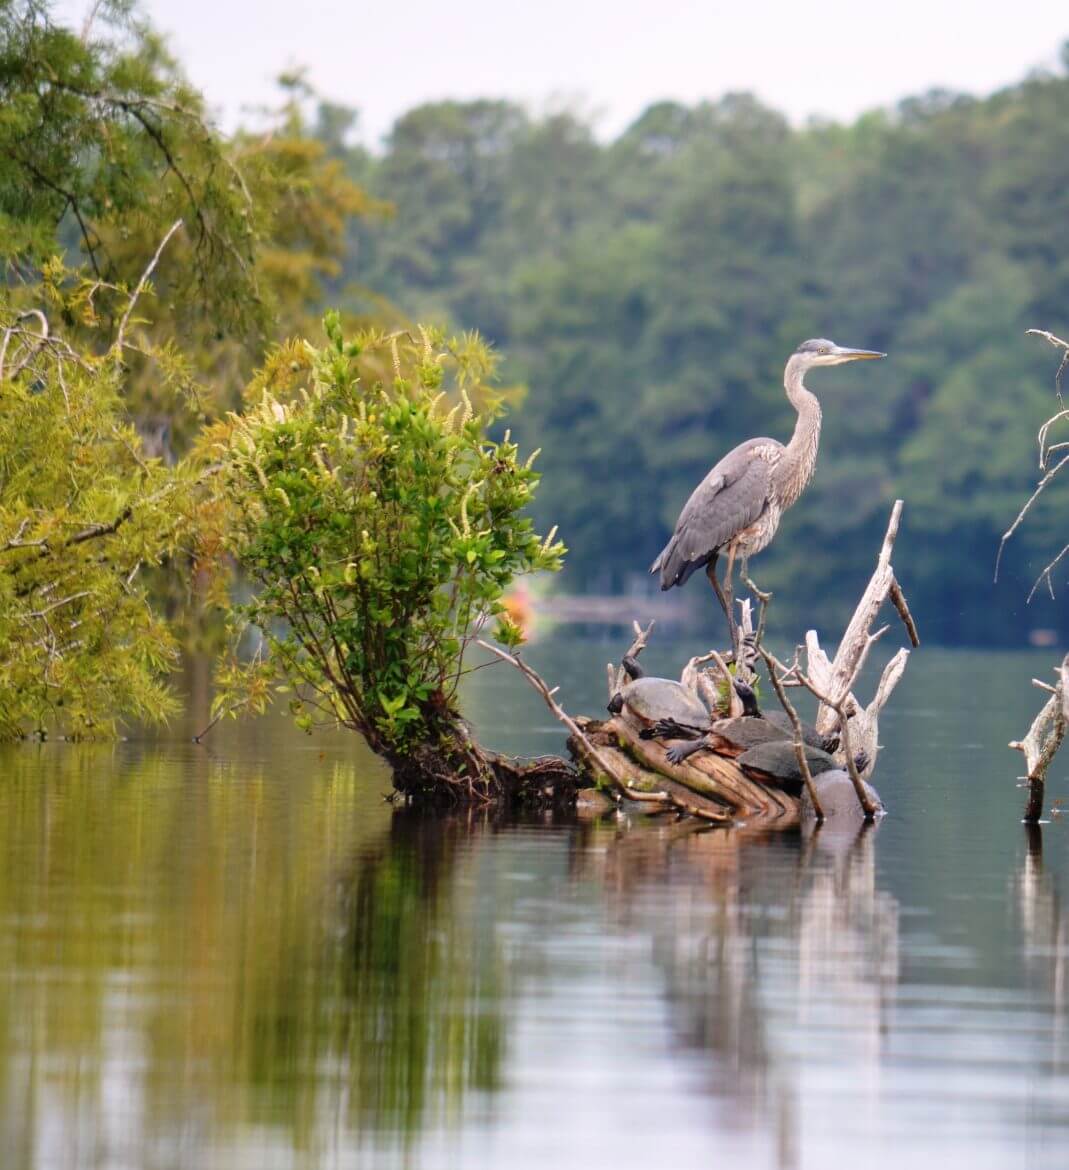 Blue heron & turtles can benefit from Sustainable Communities Grants